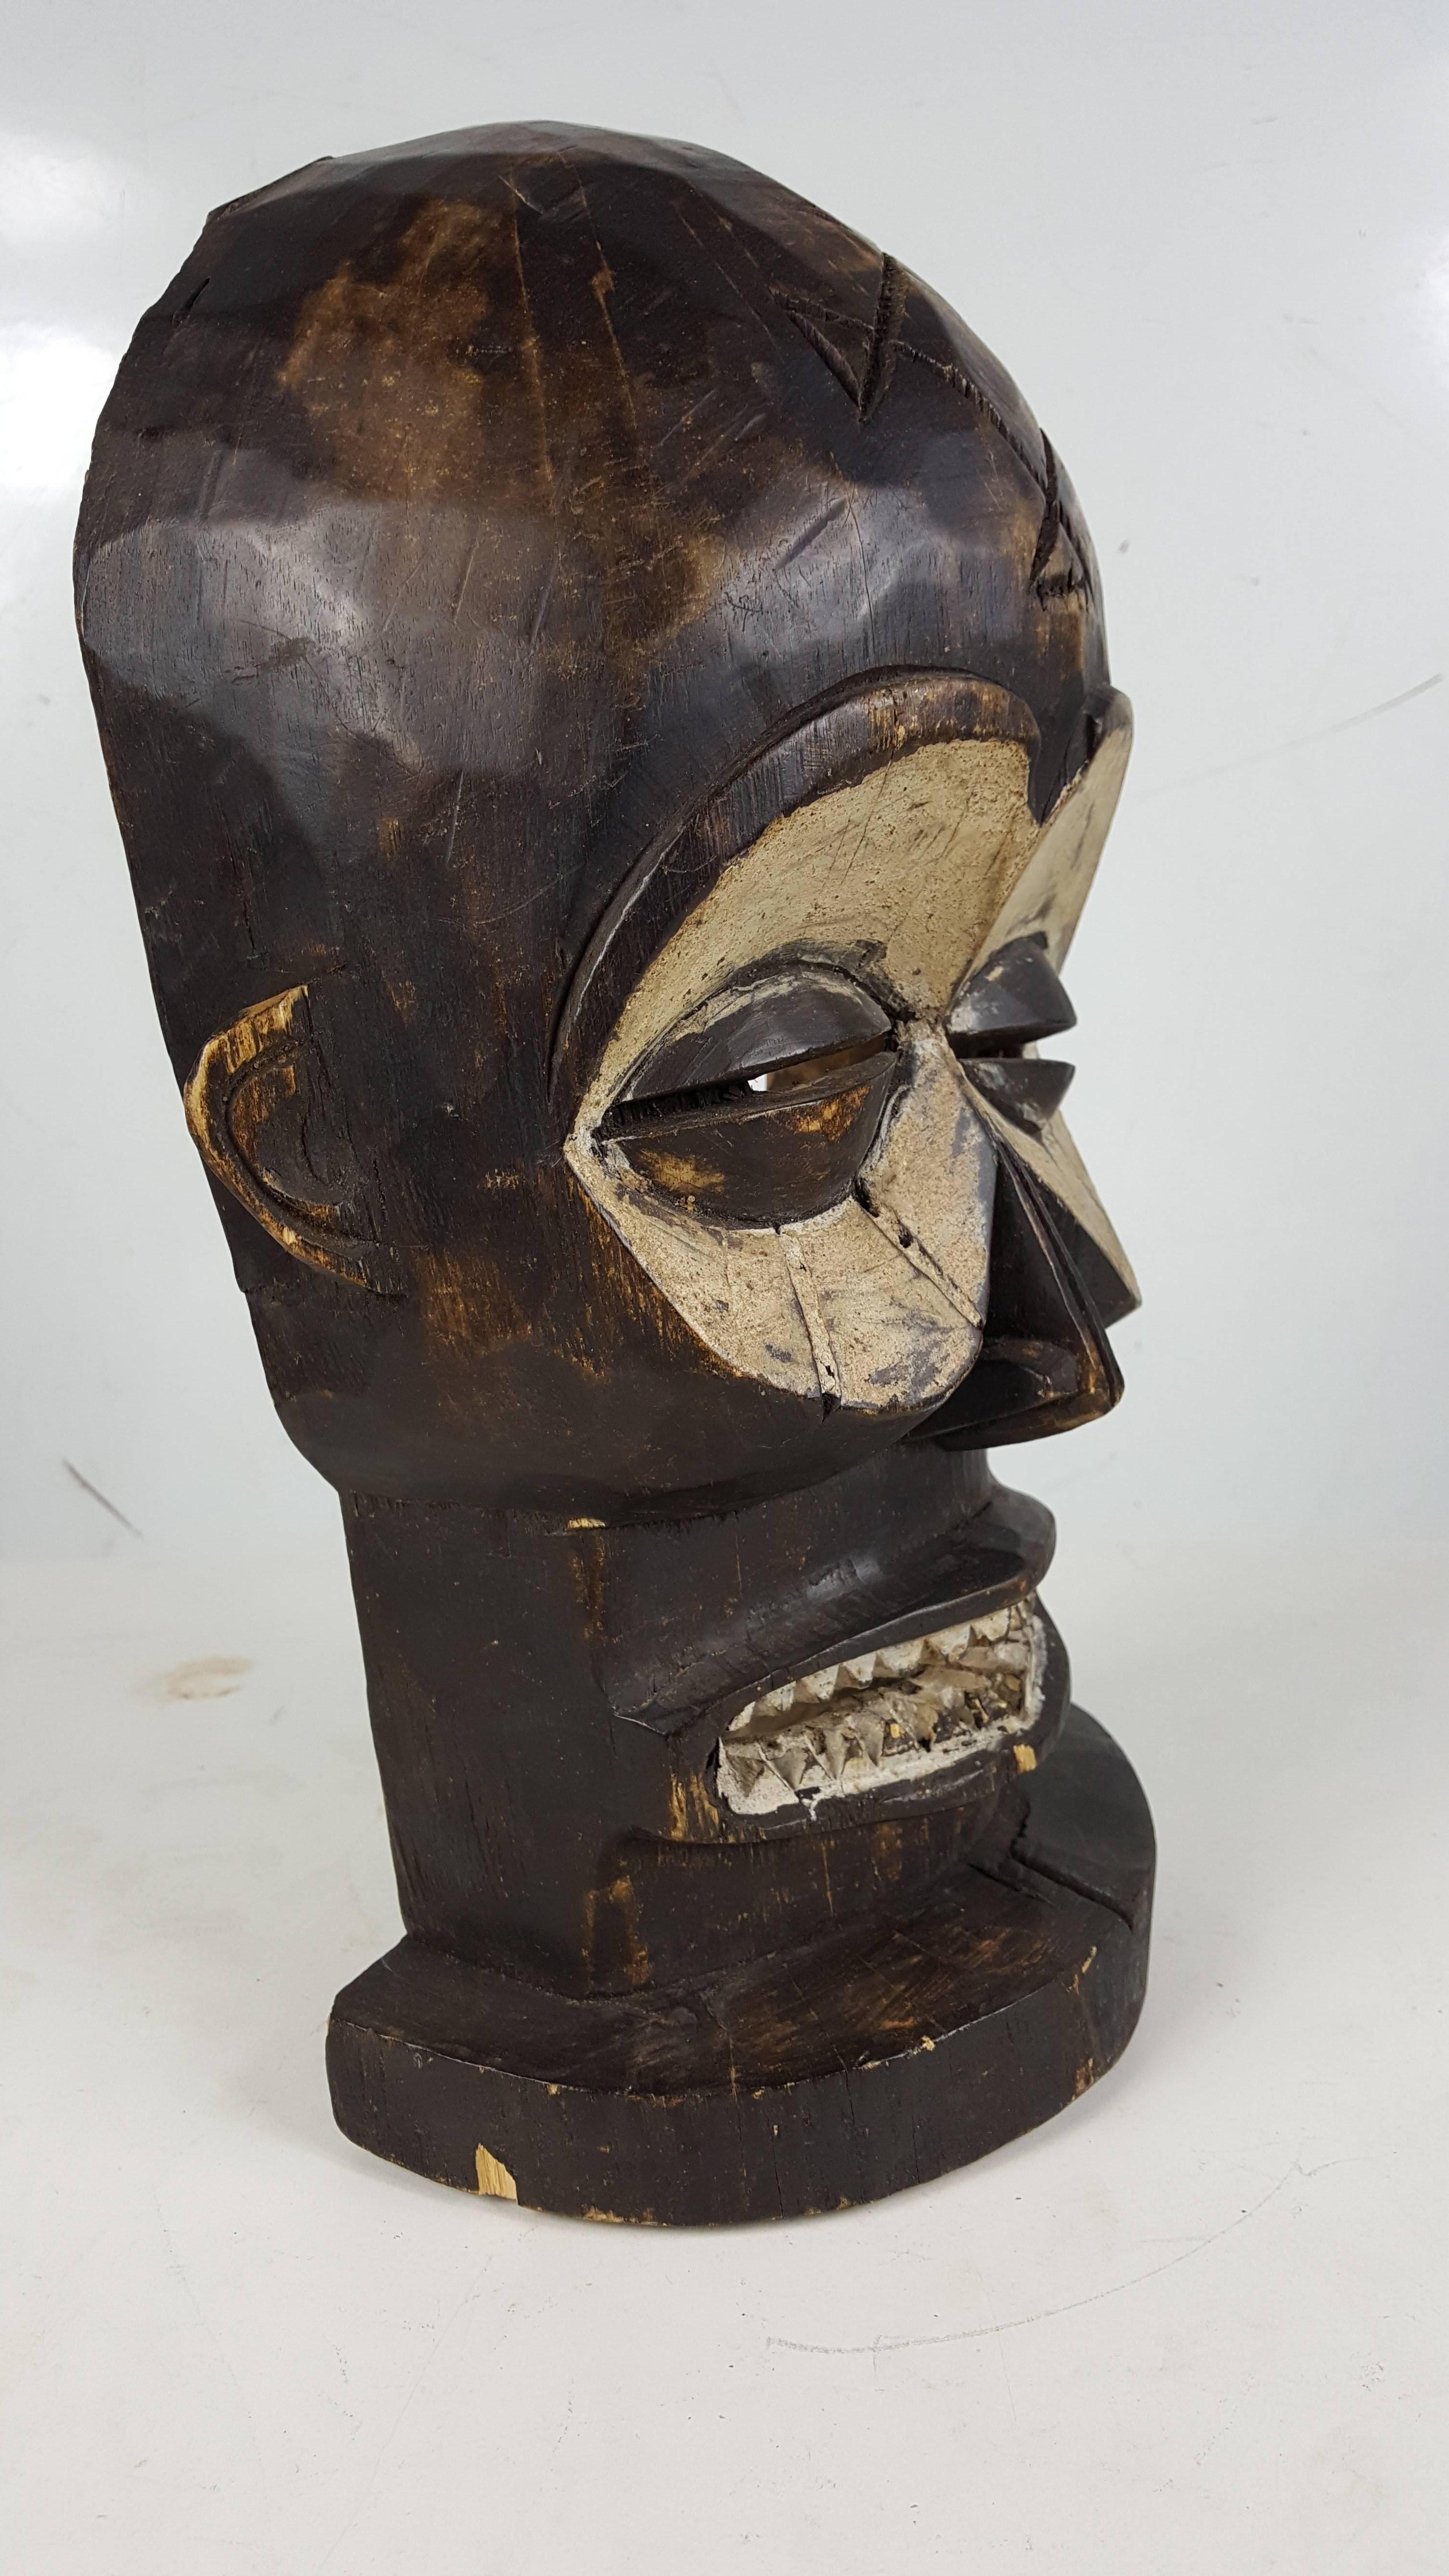 African Carved Wooden Mask in the Style of Chokwe Tribal Ritual